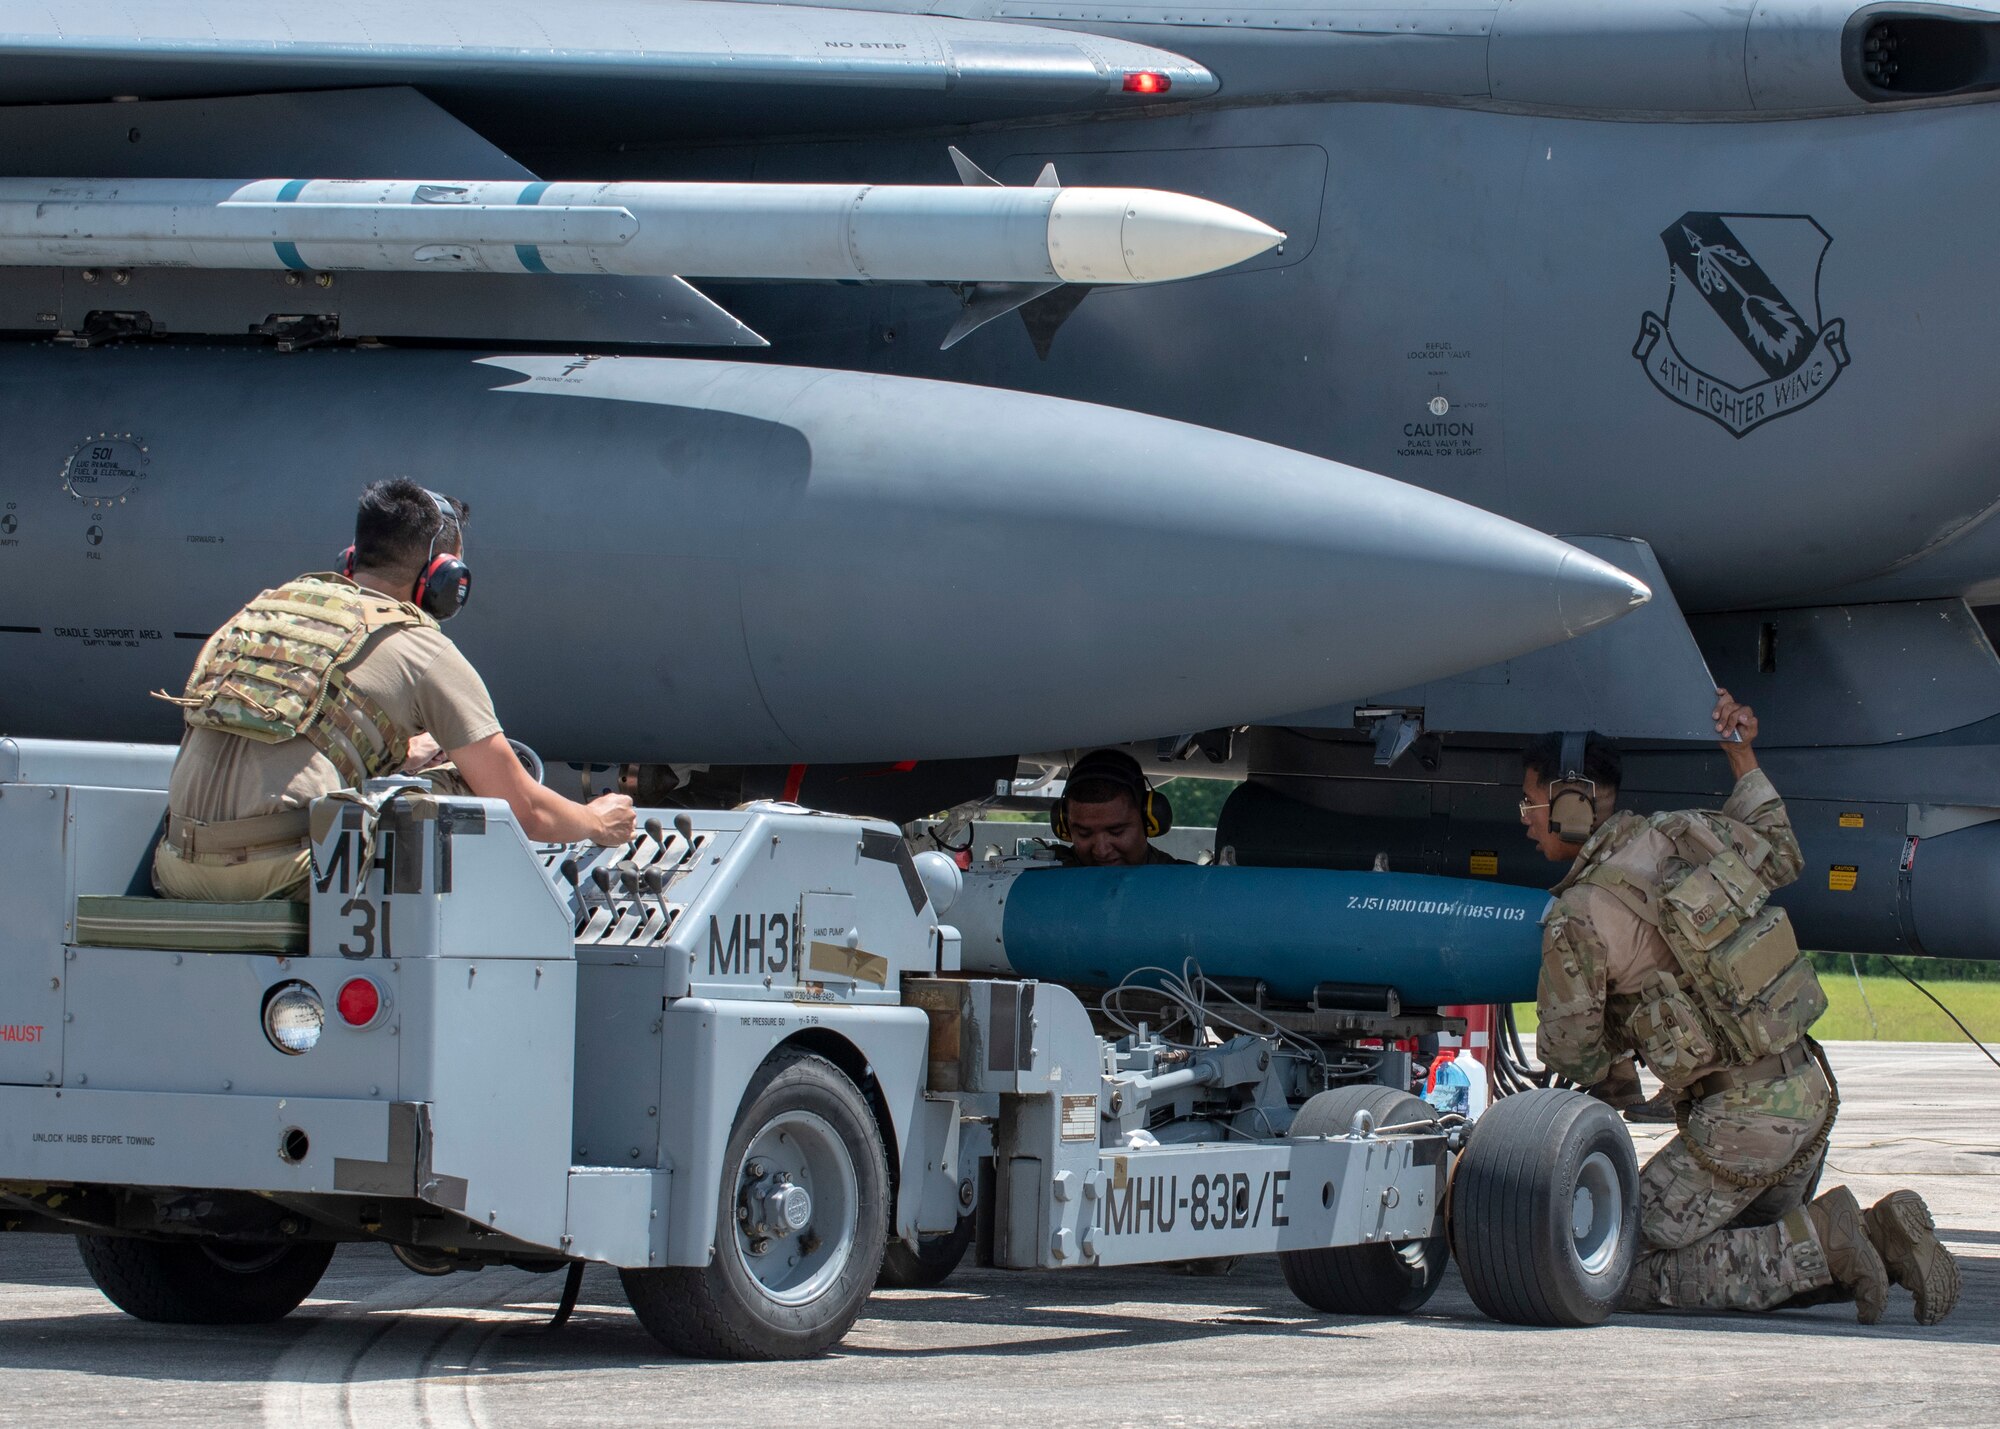 Airmen from Seymour Johnson Air Force Base load munitions onto an F-15E Strike Eagle during Razor Talon at Cherry Point Marine Corp Air Station, North Carolina, Aug.12, 2020.